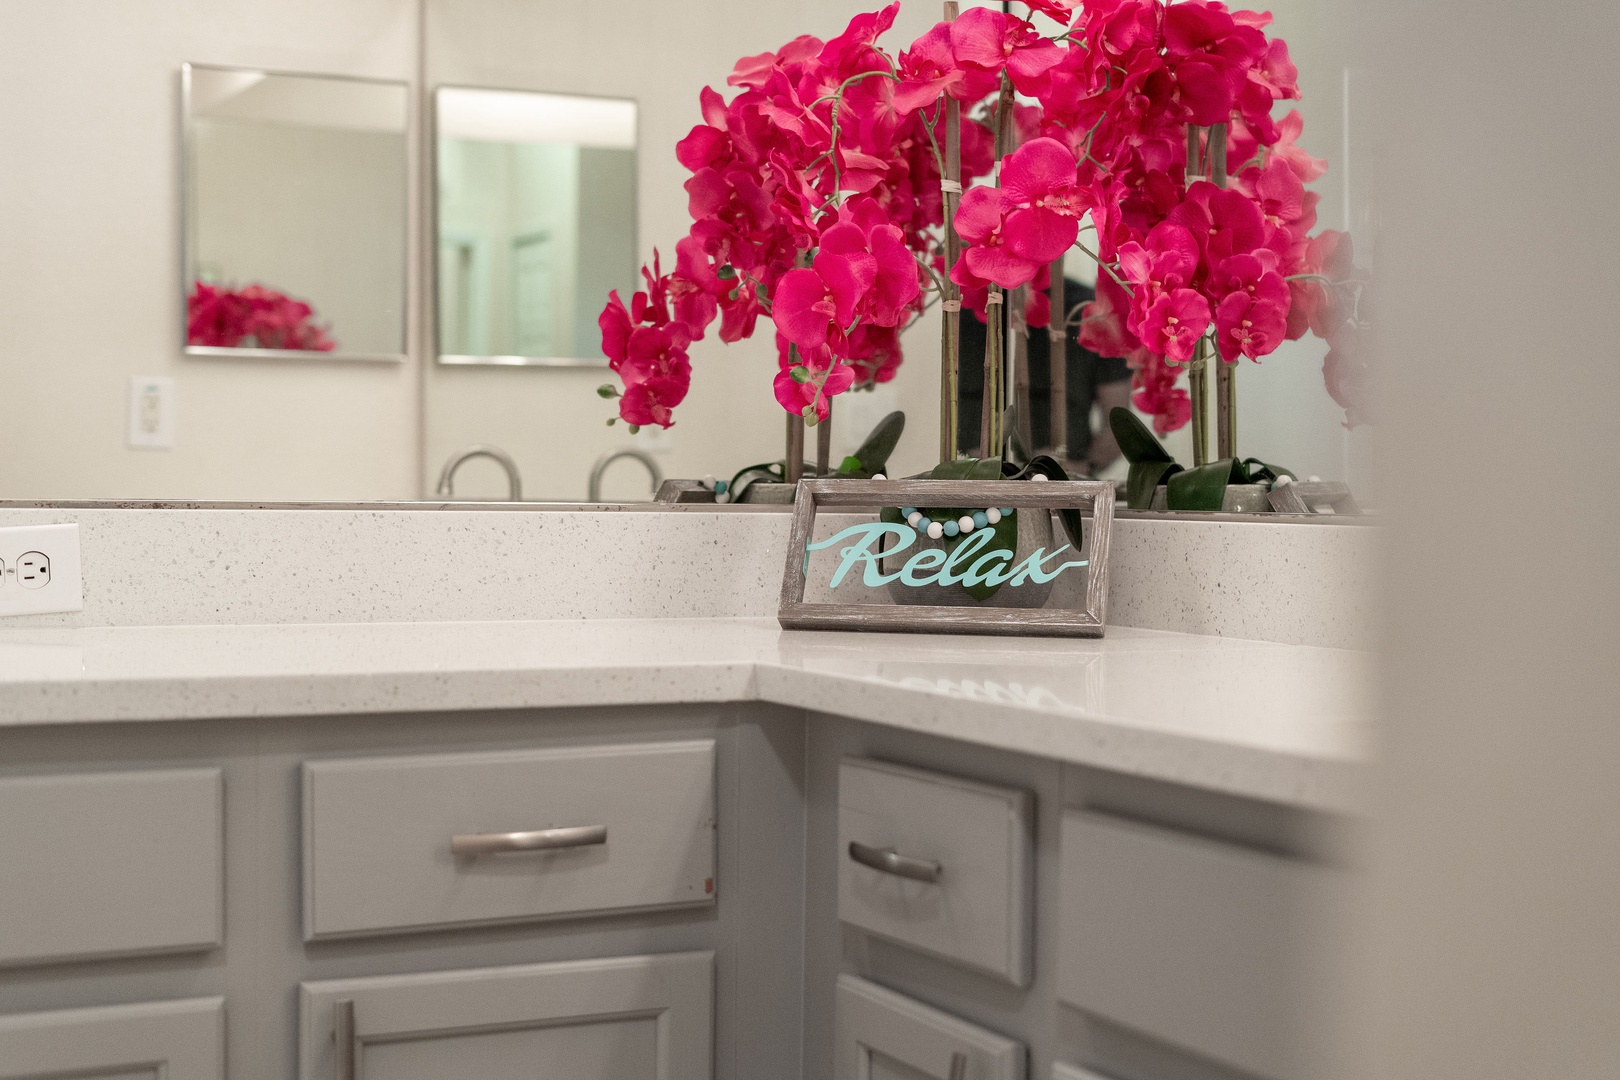 This ensuite includes dual vanities, as well as a shower & luxe soaking tub